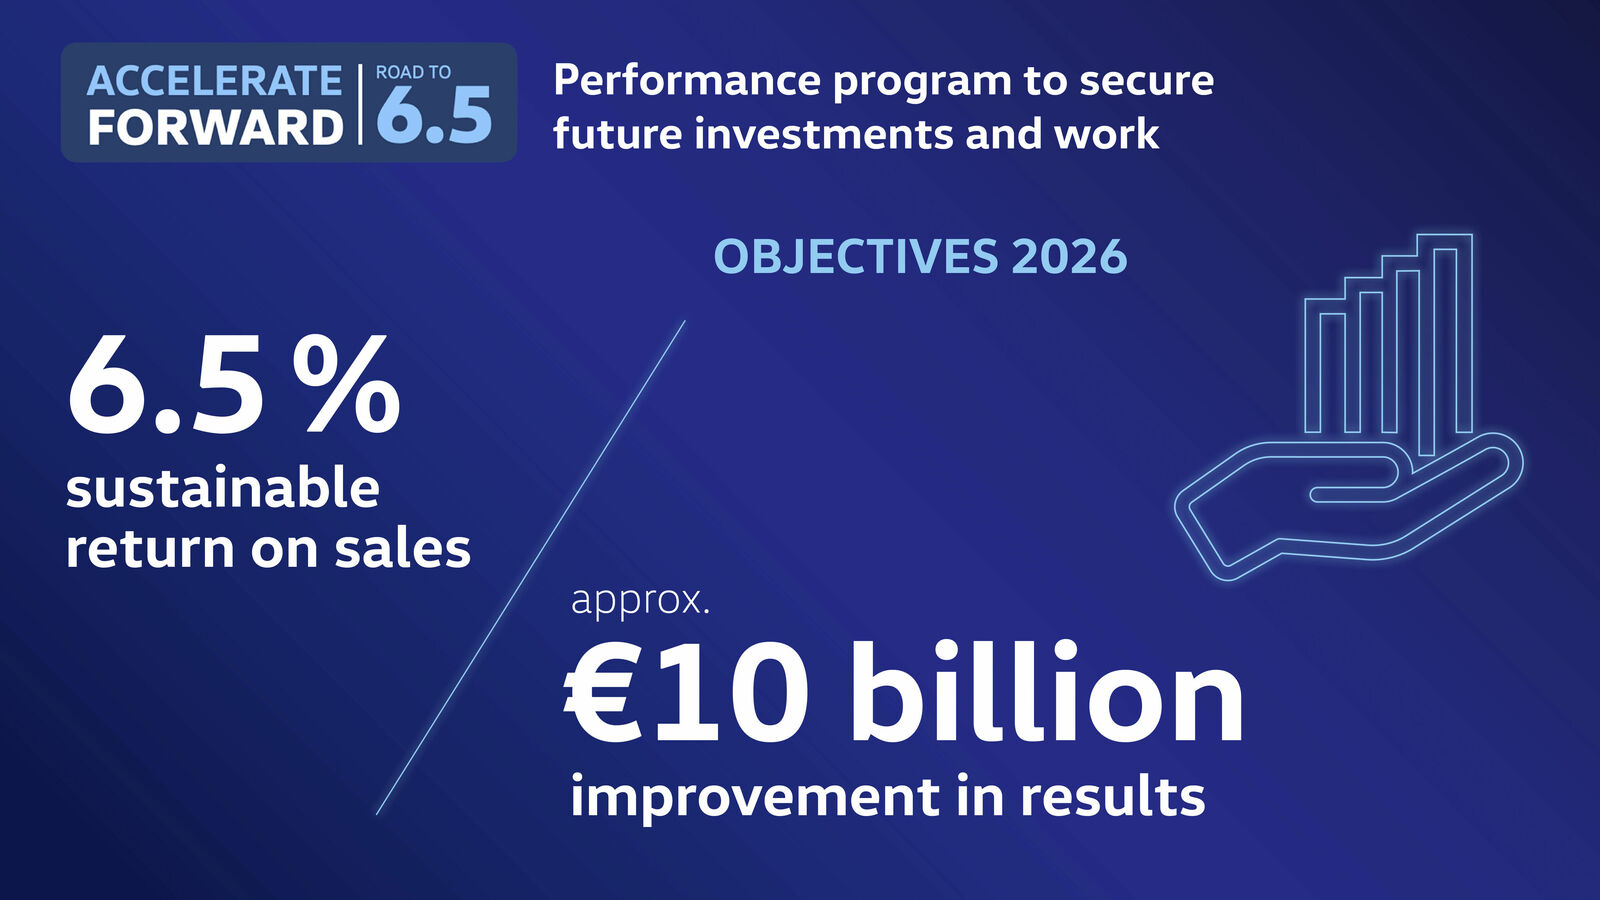 Volkswagen intends to drive up its performance and profitability in the long term with the “ACCELERATE FORWARD | Road to 6.5” global performance program.